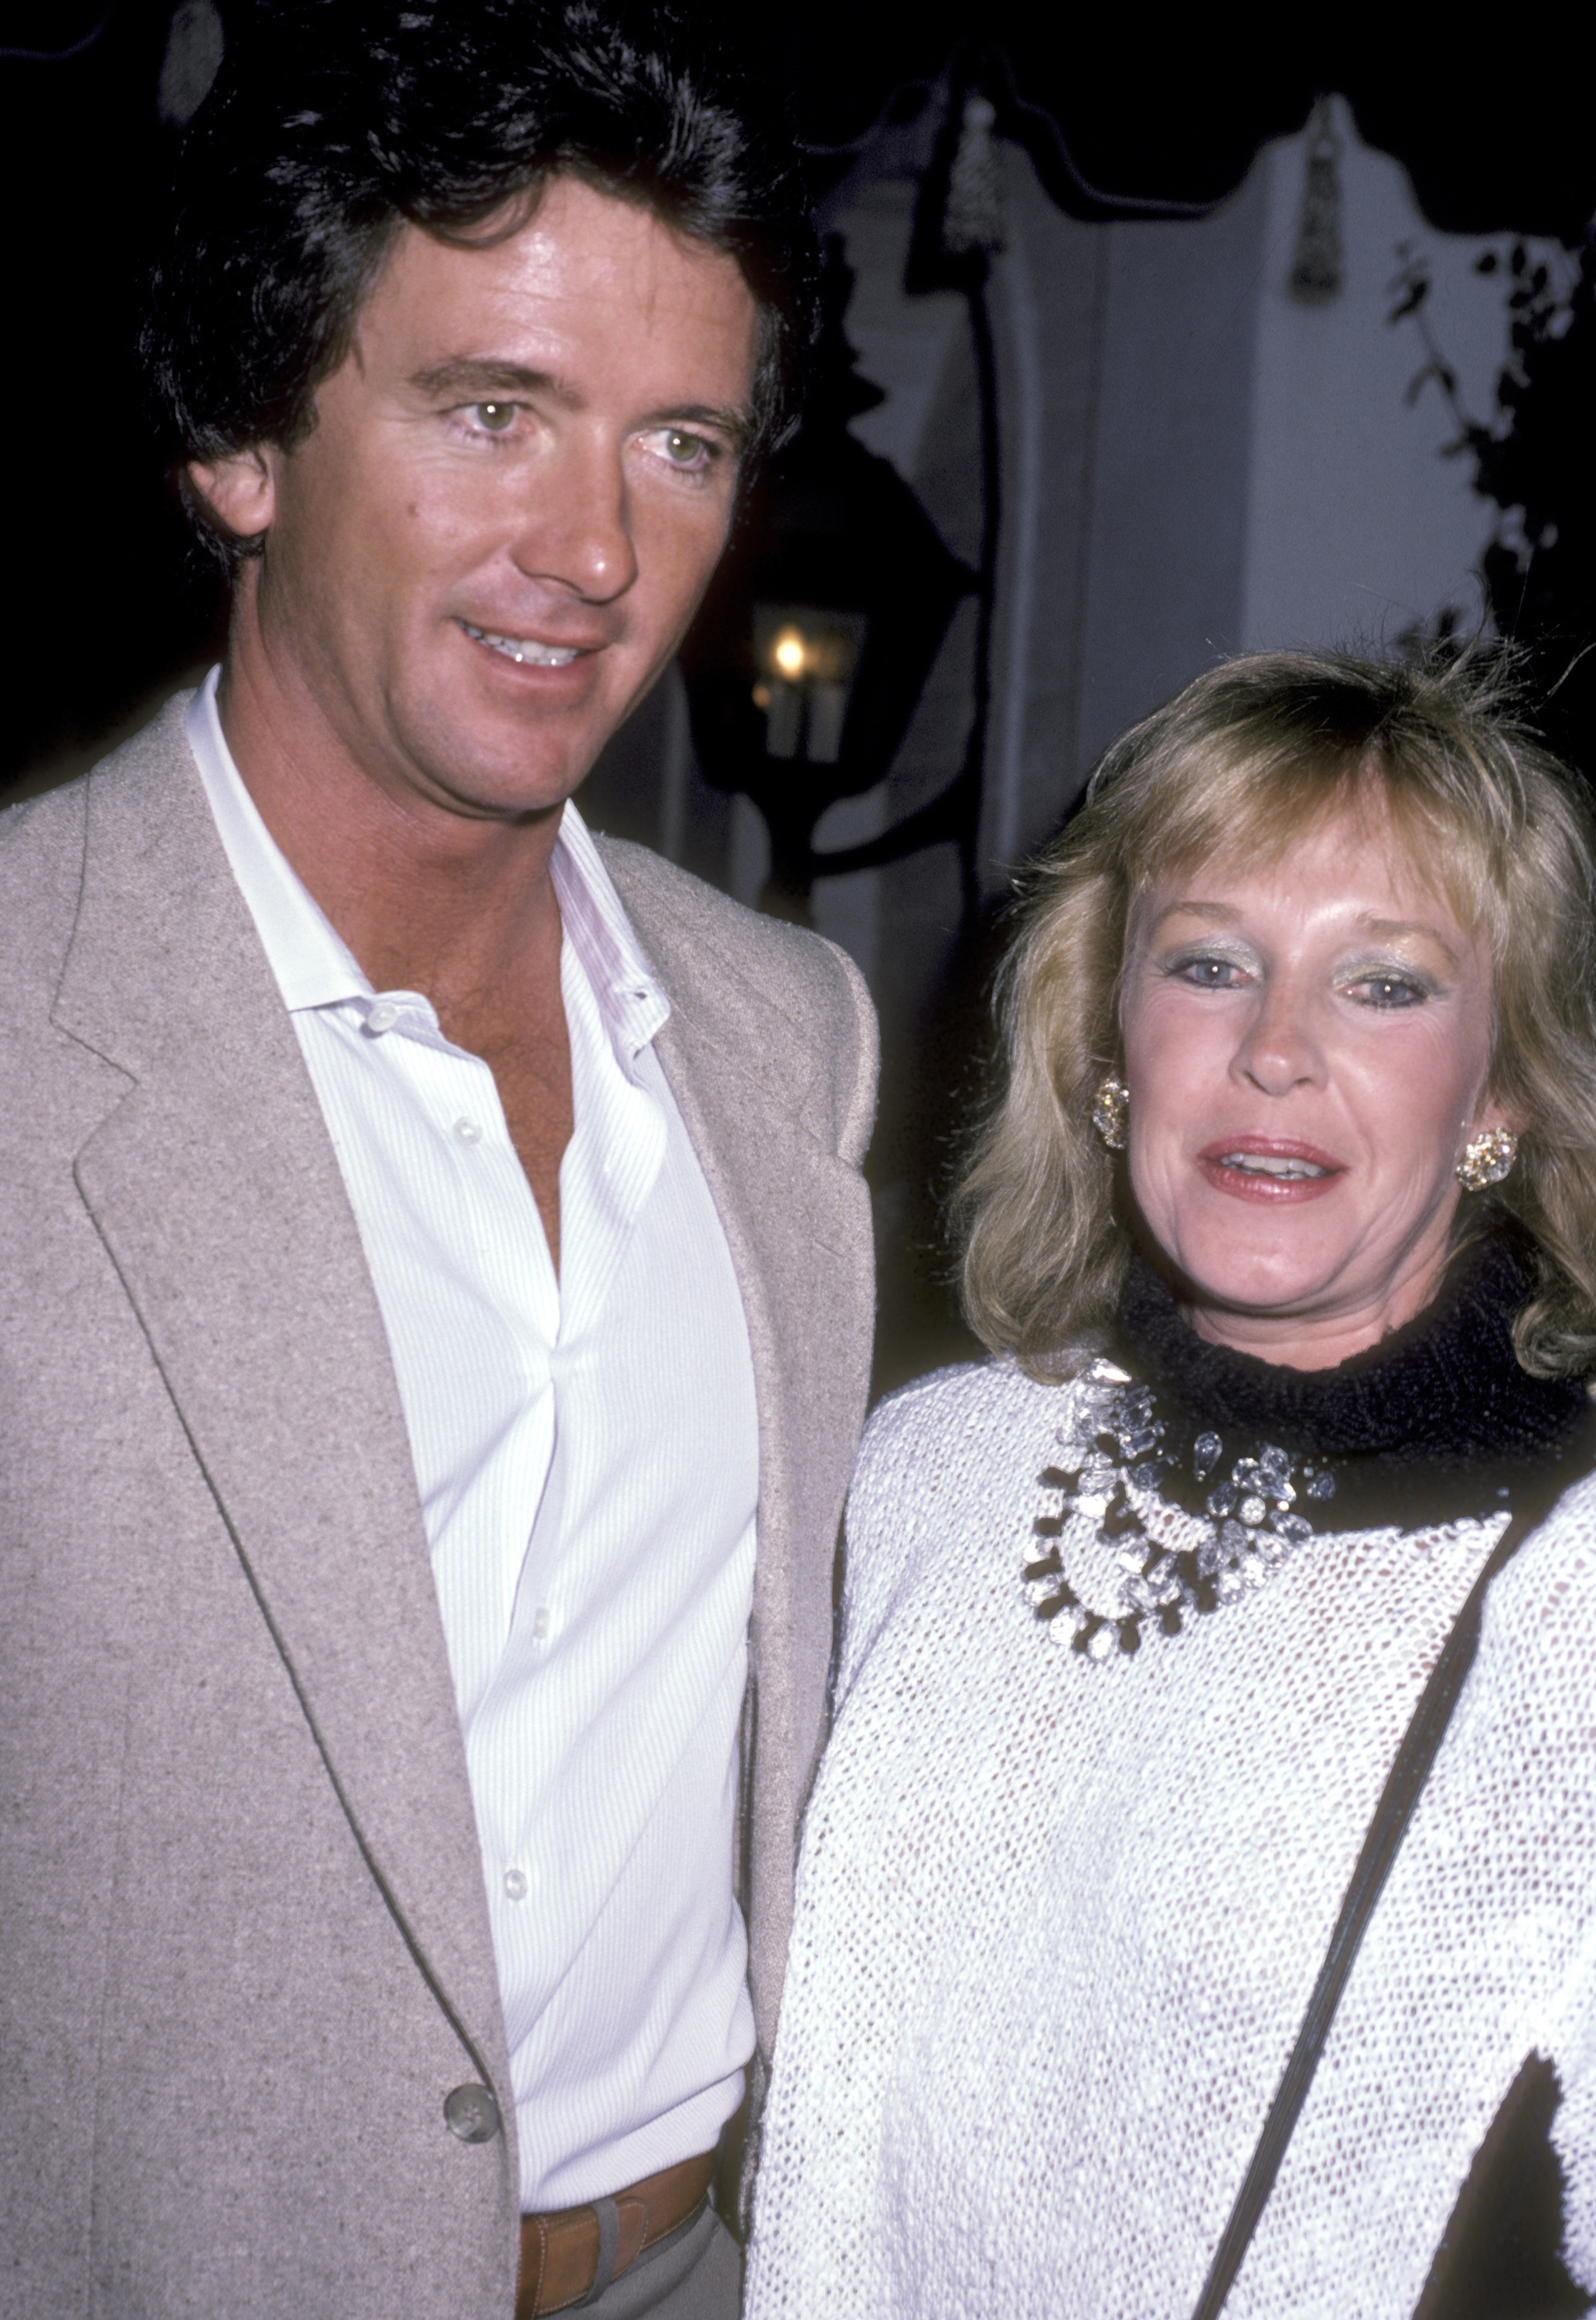 Patrick Duffy and wife Carlyn Rosser attend a Party For Glenn Larson on October 23, 1985 at Chasen's Restaurant in Beverly Hills, California | Source: Getty Images